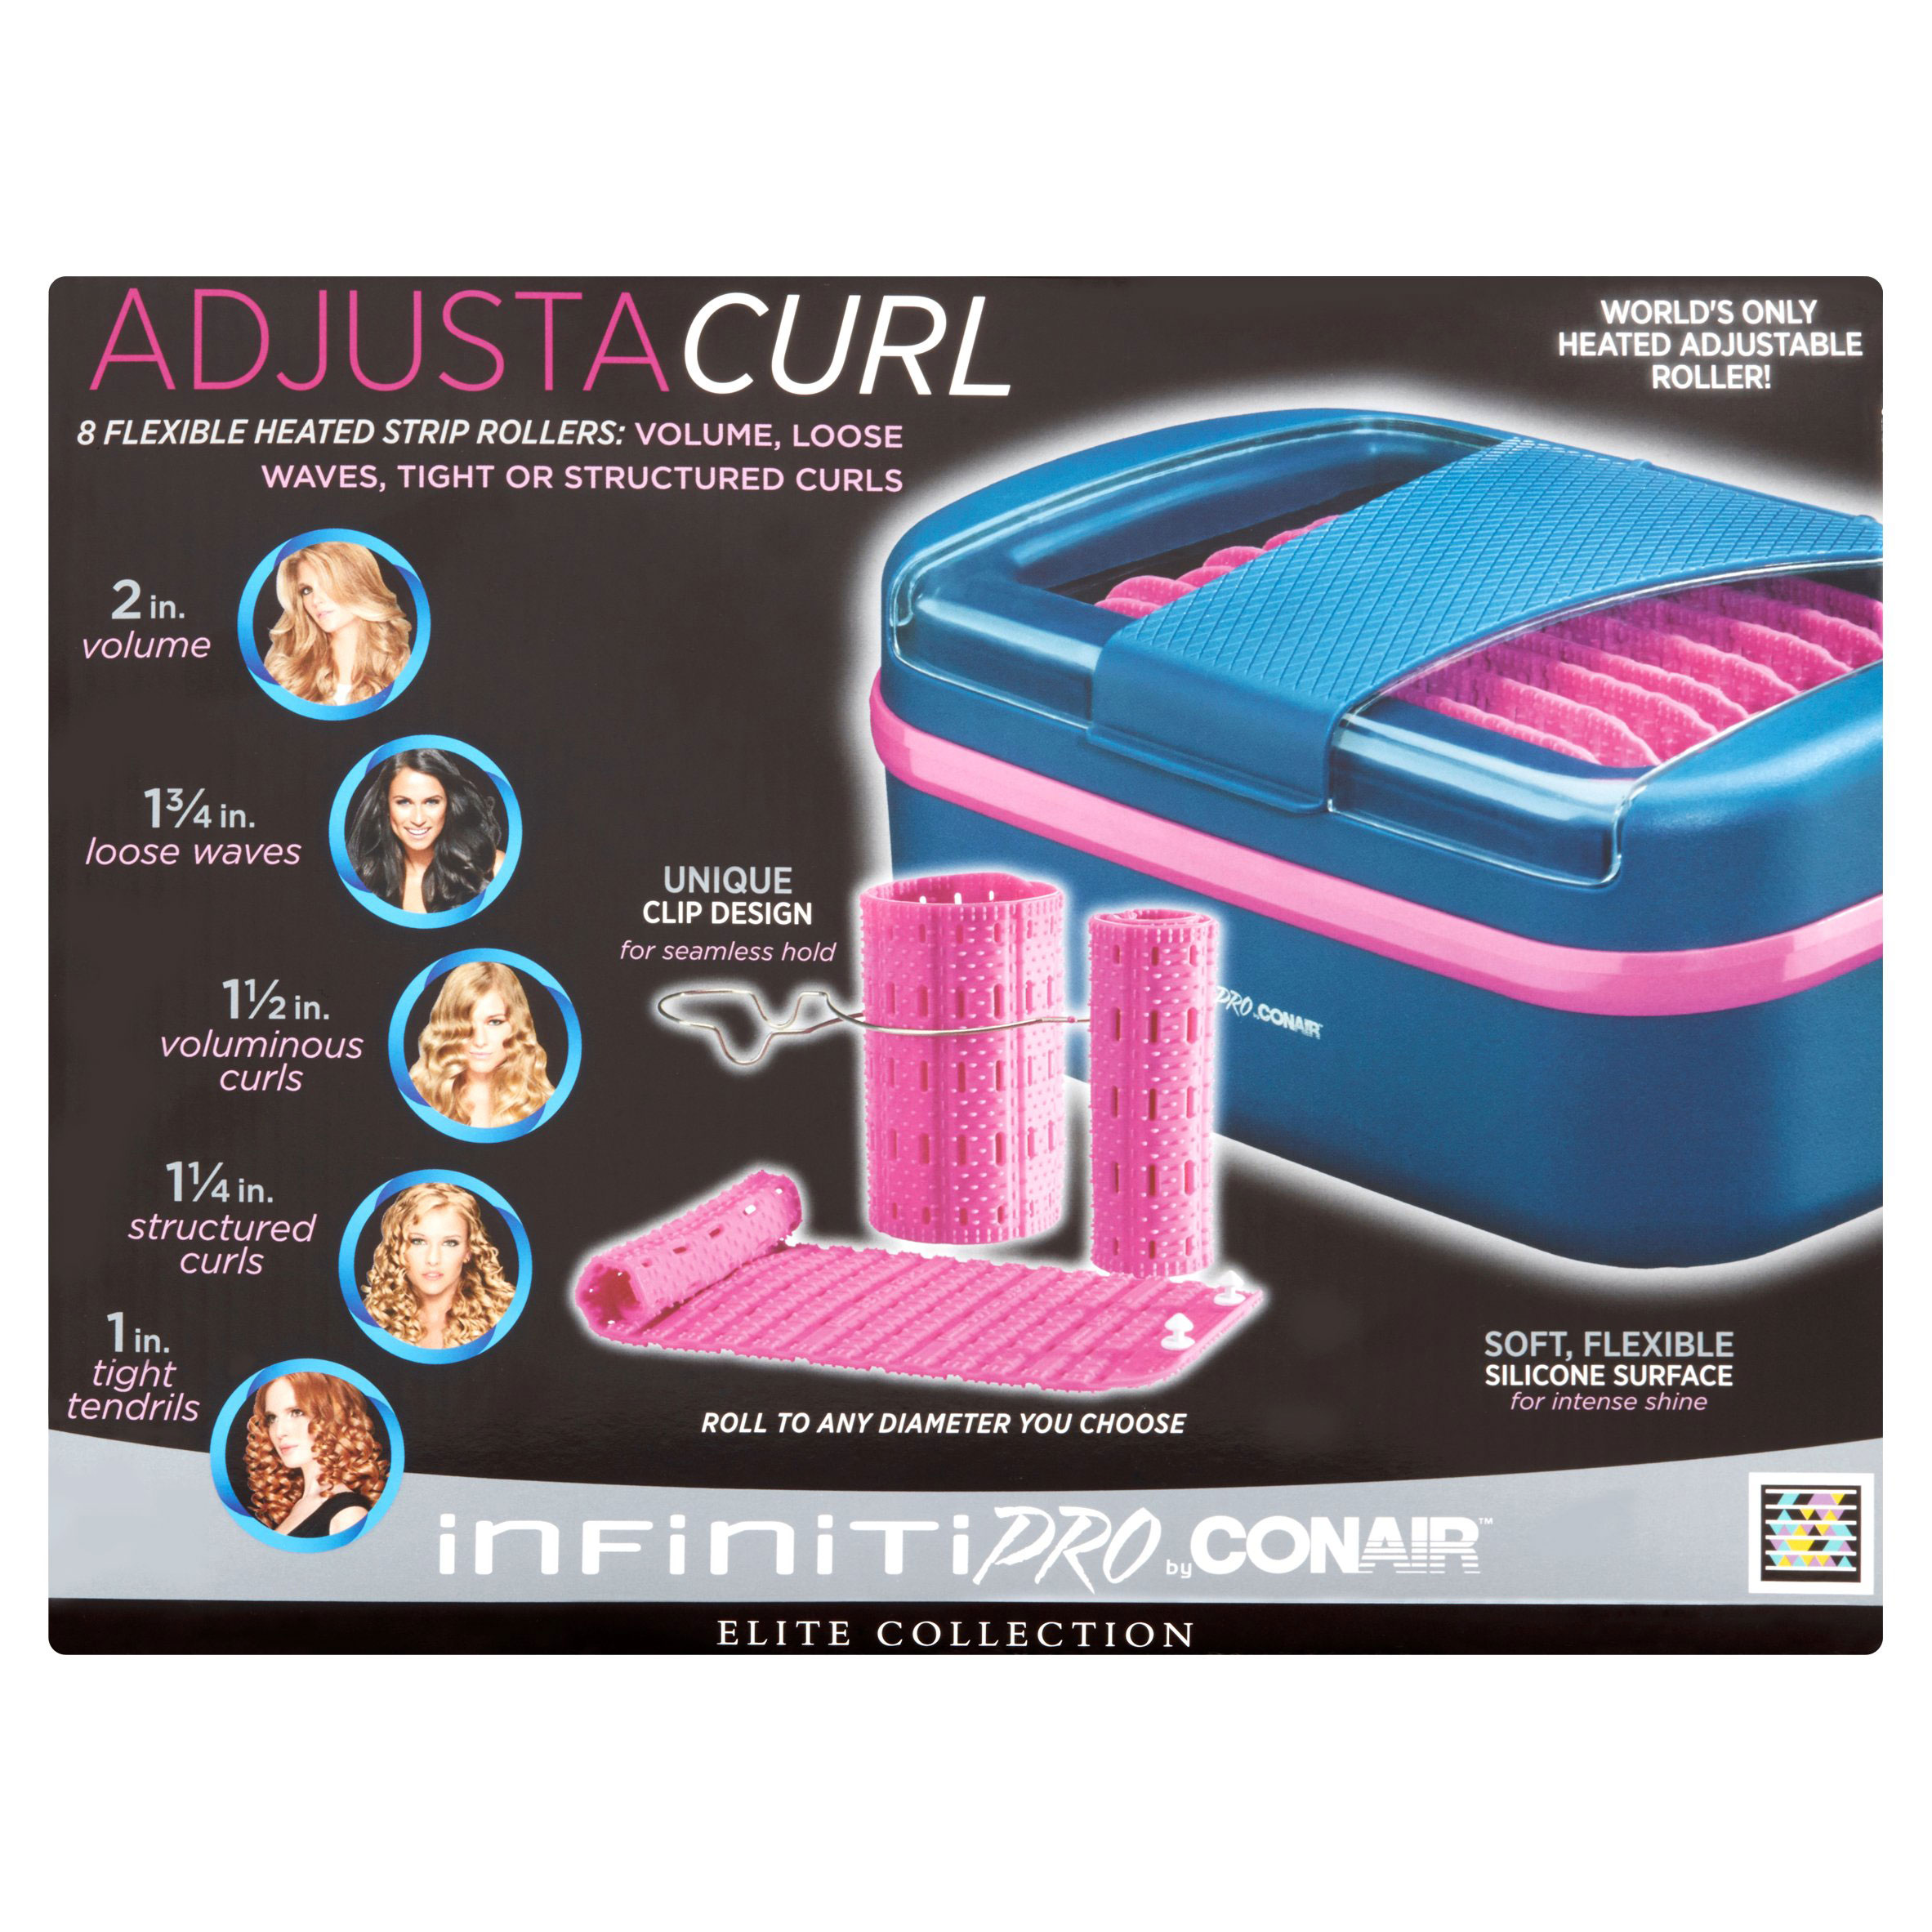 Conair AdjustaCurl InfinitiPRO Soft Flexi Silicone Heated Rollers 1-Pack - Click Image to Close